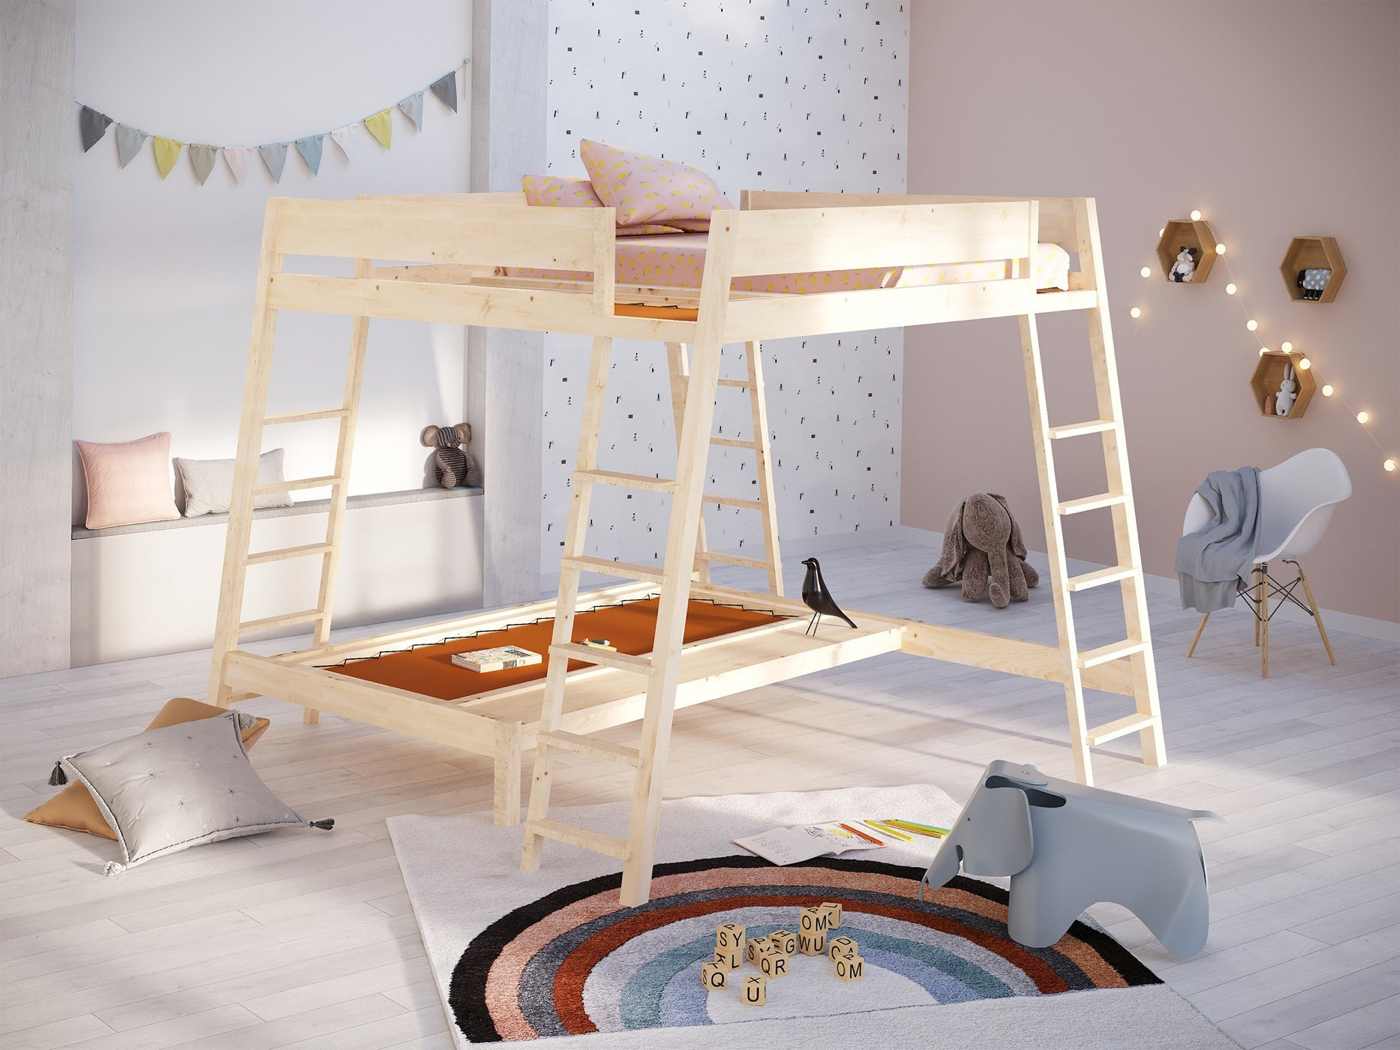 Puristic bunk bed with play mattress and four persons offers play area and dormitory design ideas for small rooms